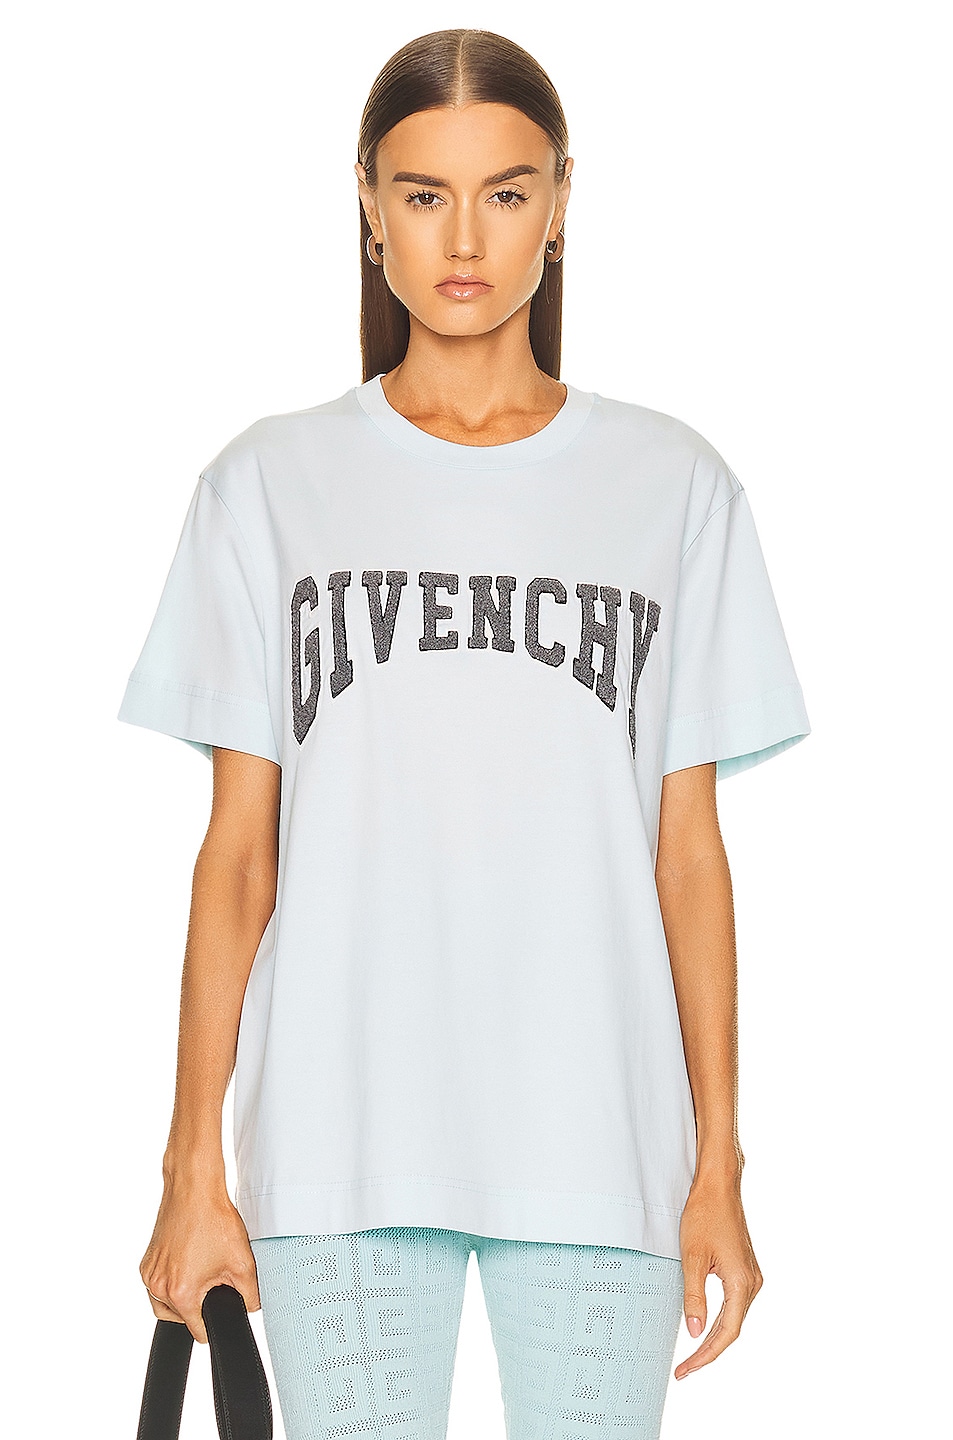 Image 1 of Givenchy Short Sleeve Classic Fit T-Shirt in Aqua Marine